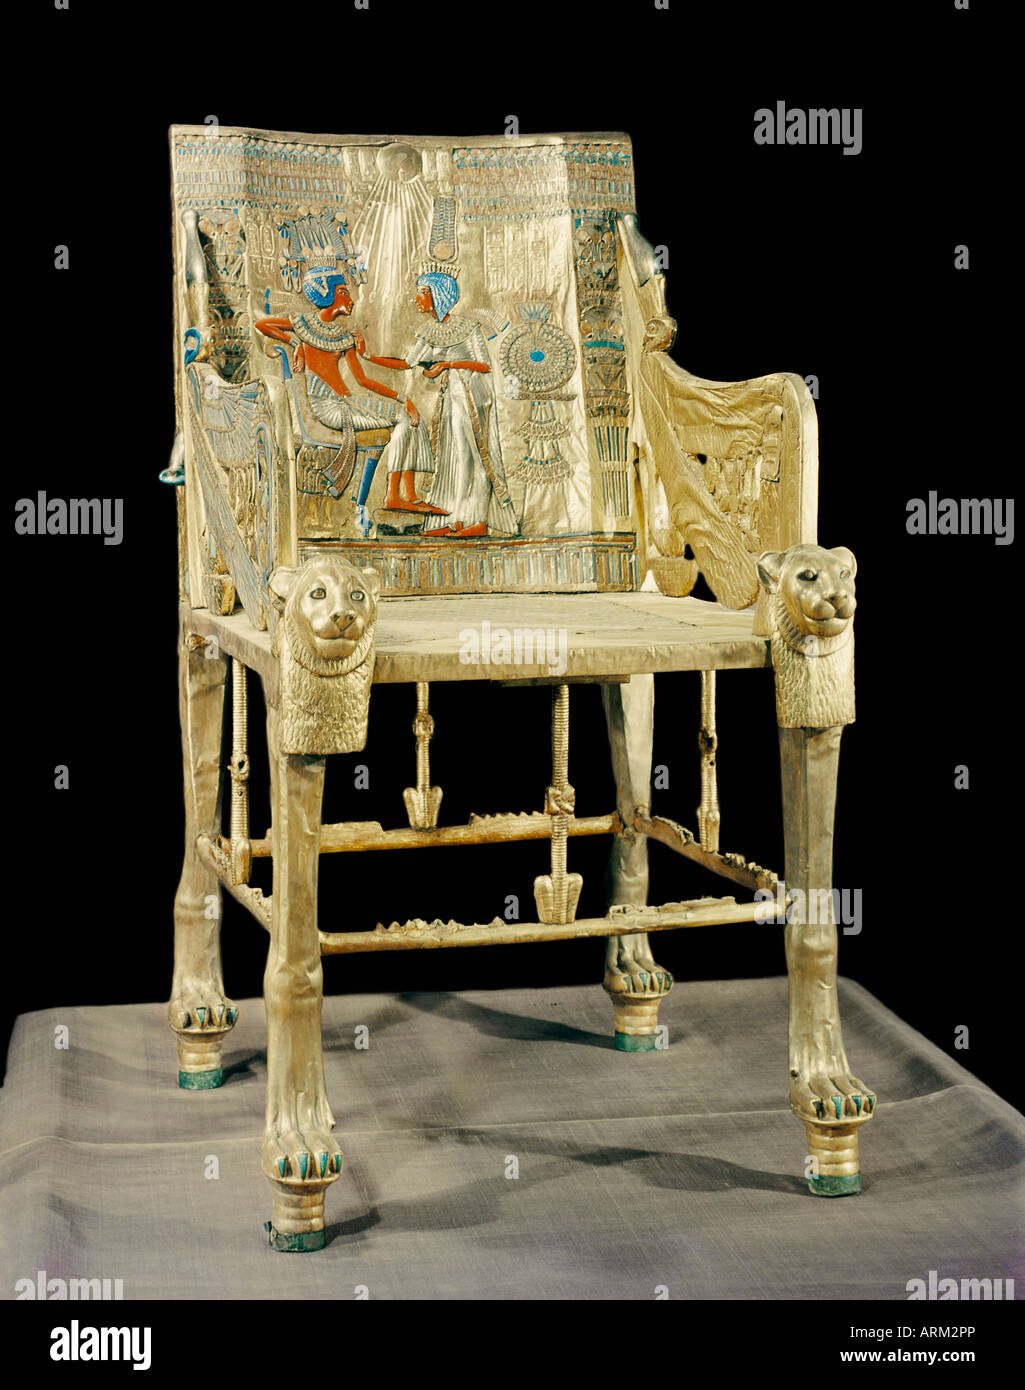 The gilt throne, the back decorated with a scene showing the royal couple, from the tomb of the pharaoh Tutankhamun Stock Photo